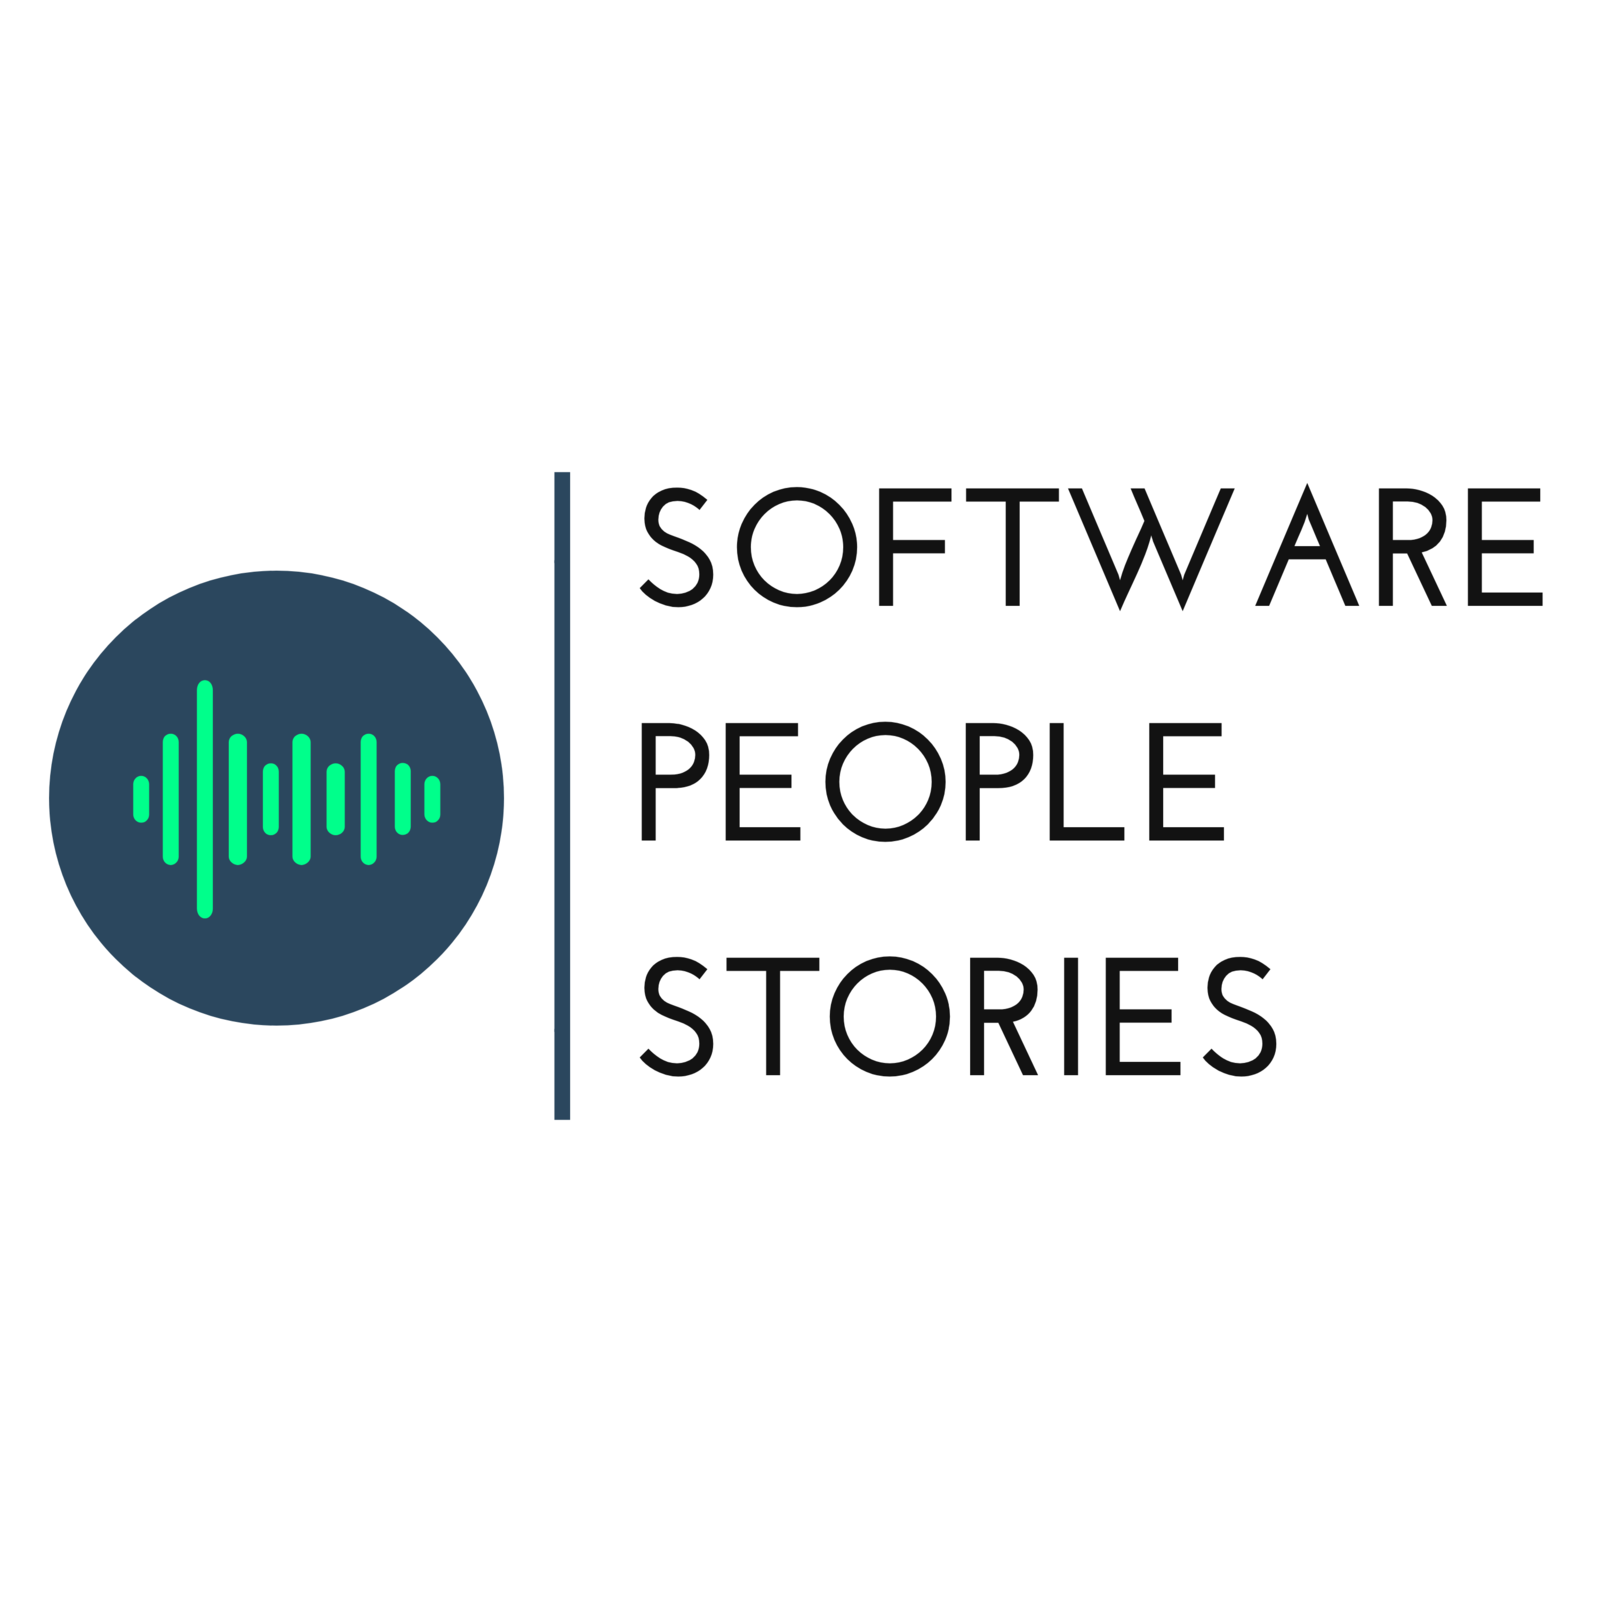 Software People Stories